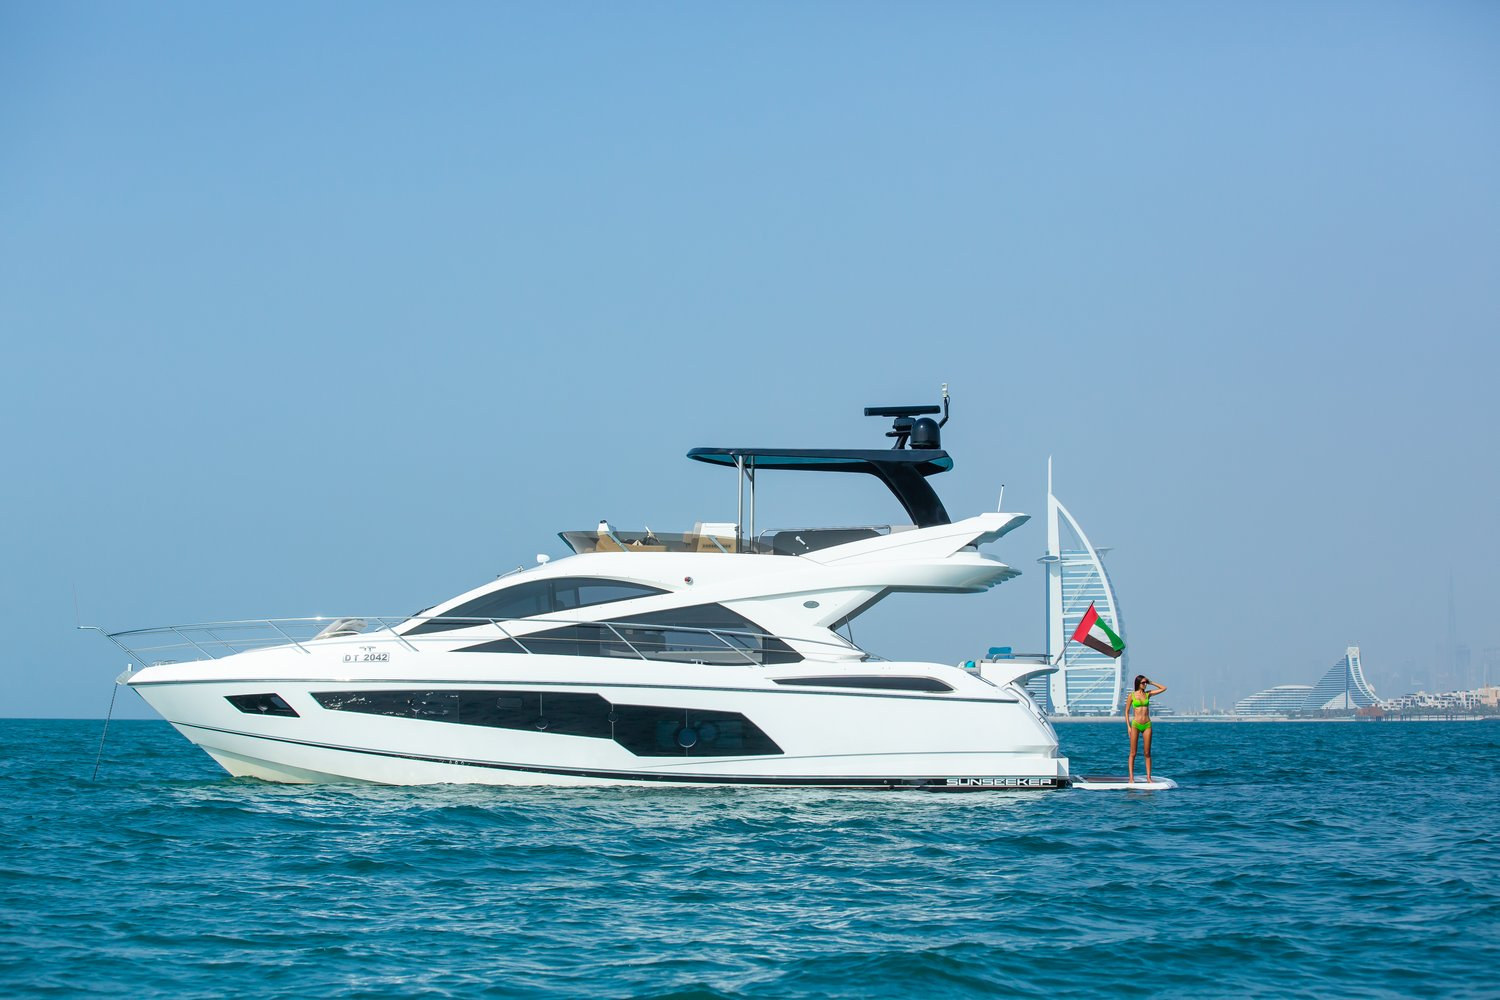 Narrowing Down The Best Boat Rental Options For Your Next Trip